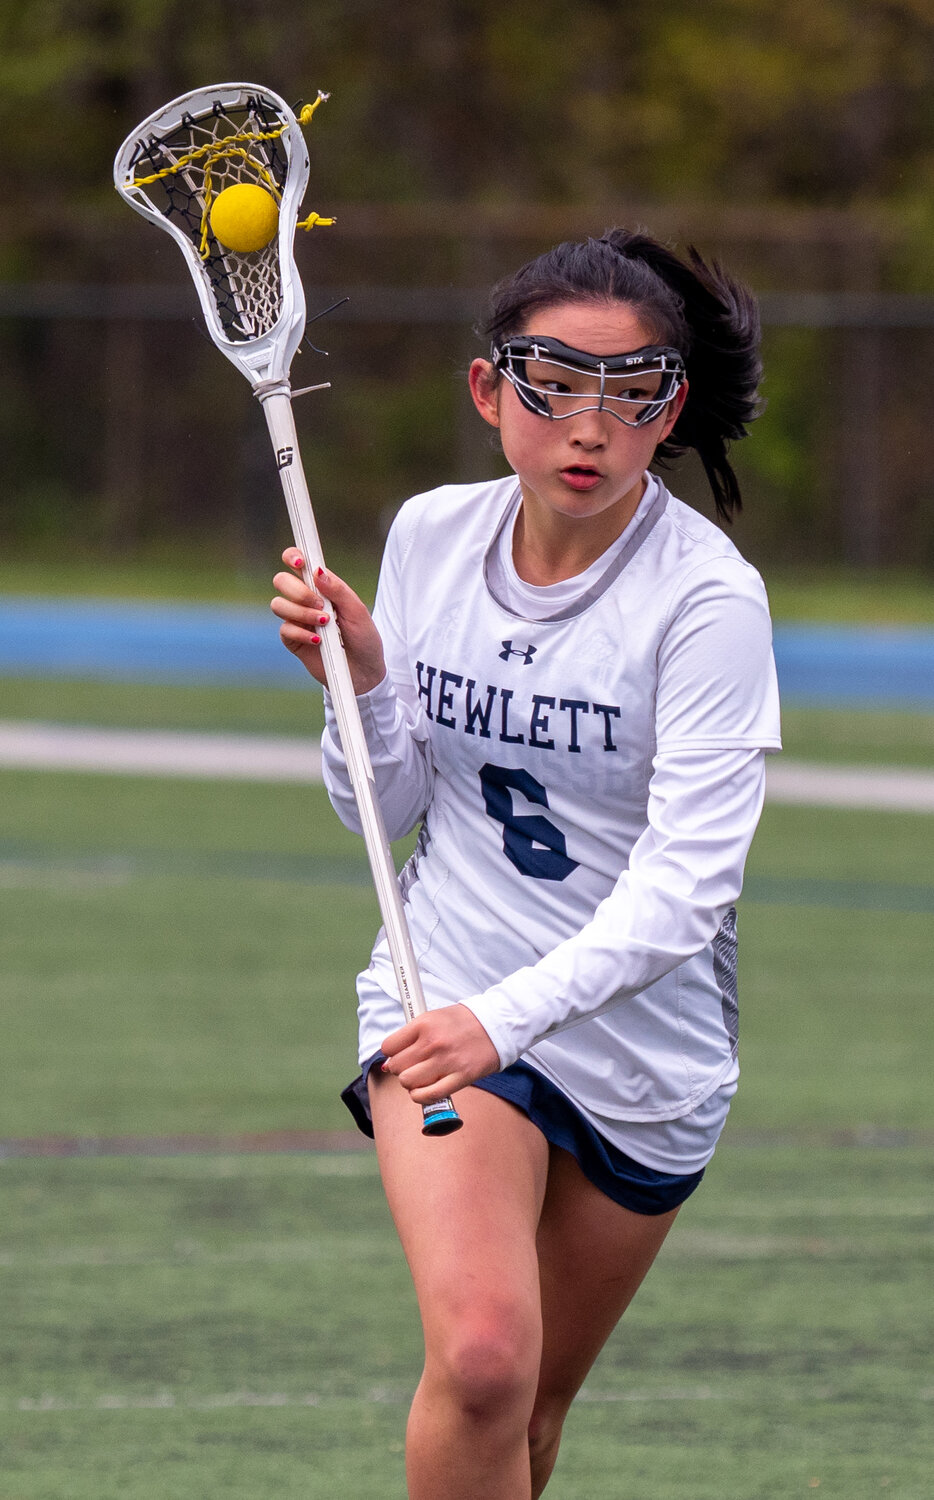 Sophomore Krista Lee leads a deep group of offensive weapons for the playoff-bound Bulldogs with 21 goals and 6 assists.